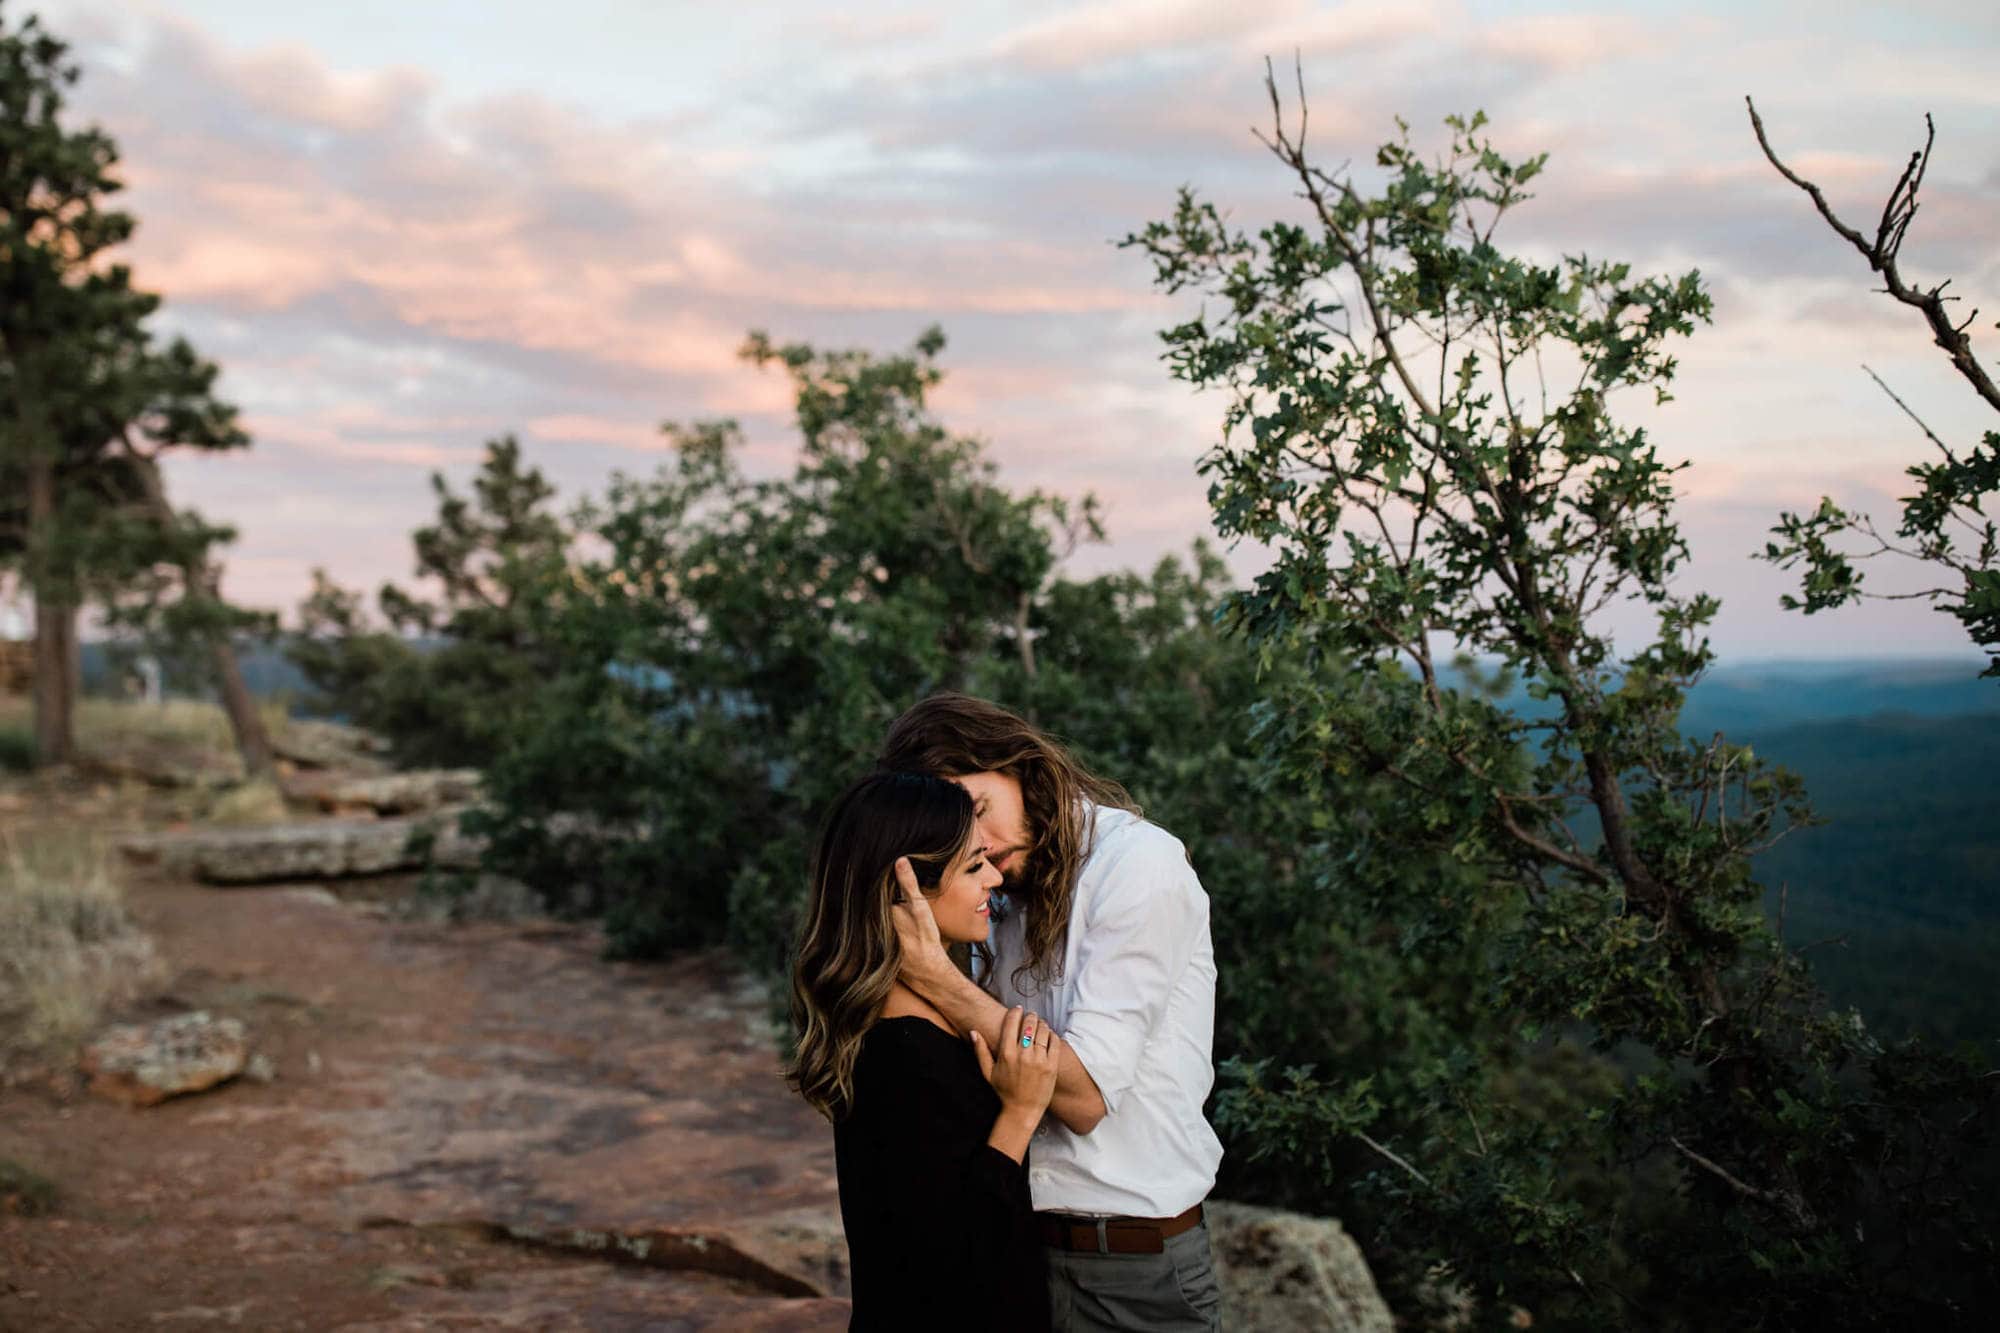 In the fading sunset light, the couple stands at the edge of the cliff during their forest engagement photo session.